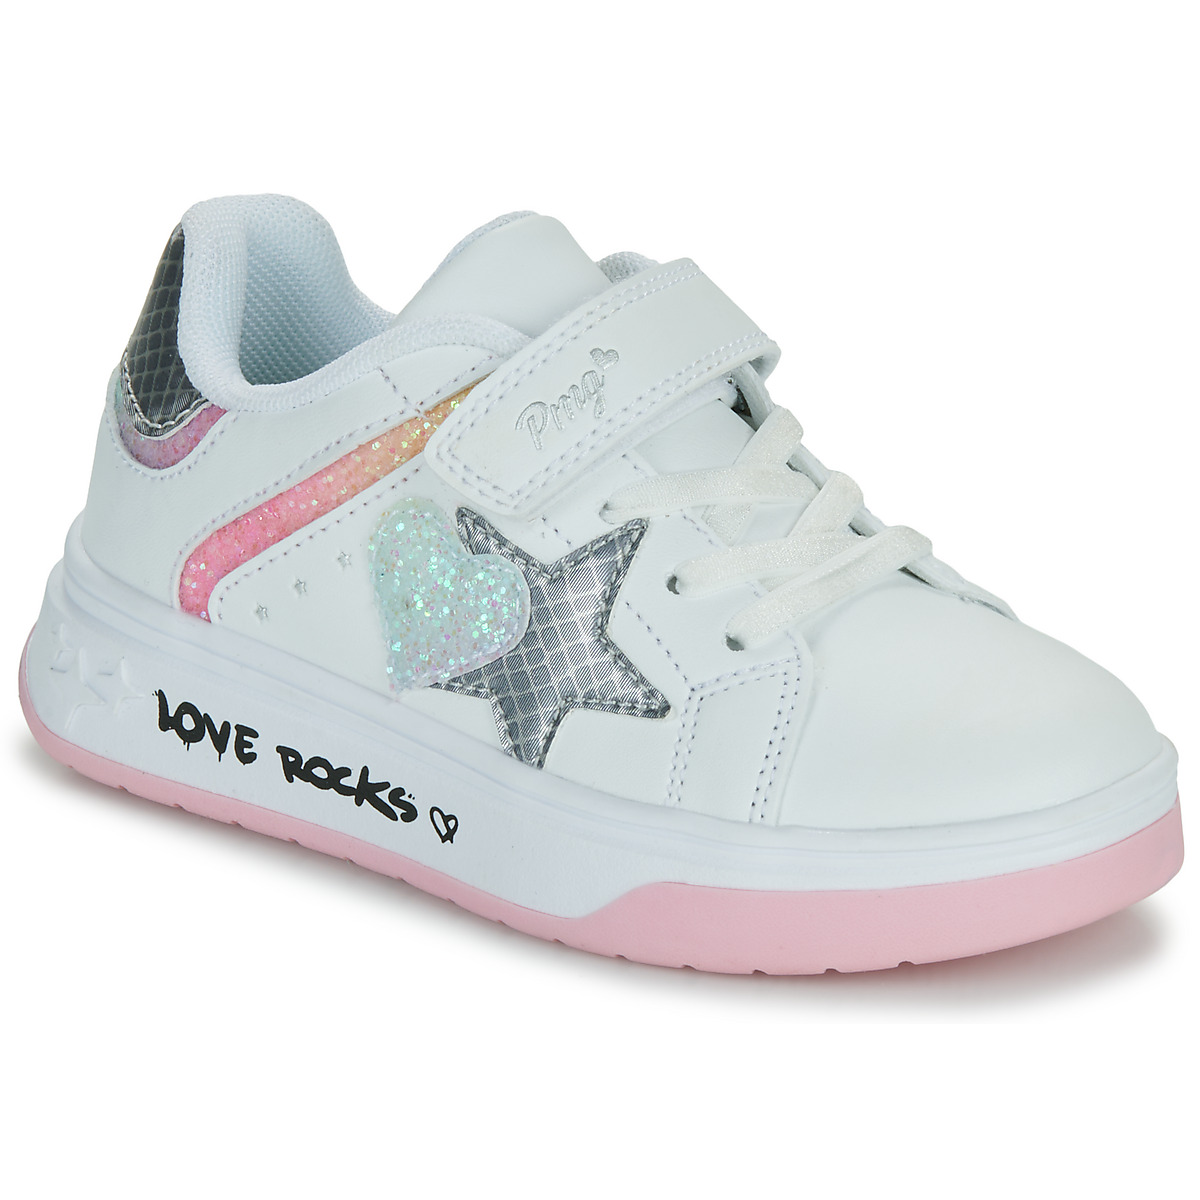 Shoes Girl Low top trainers Primigi B&G GLAM White / Pink / Silver